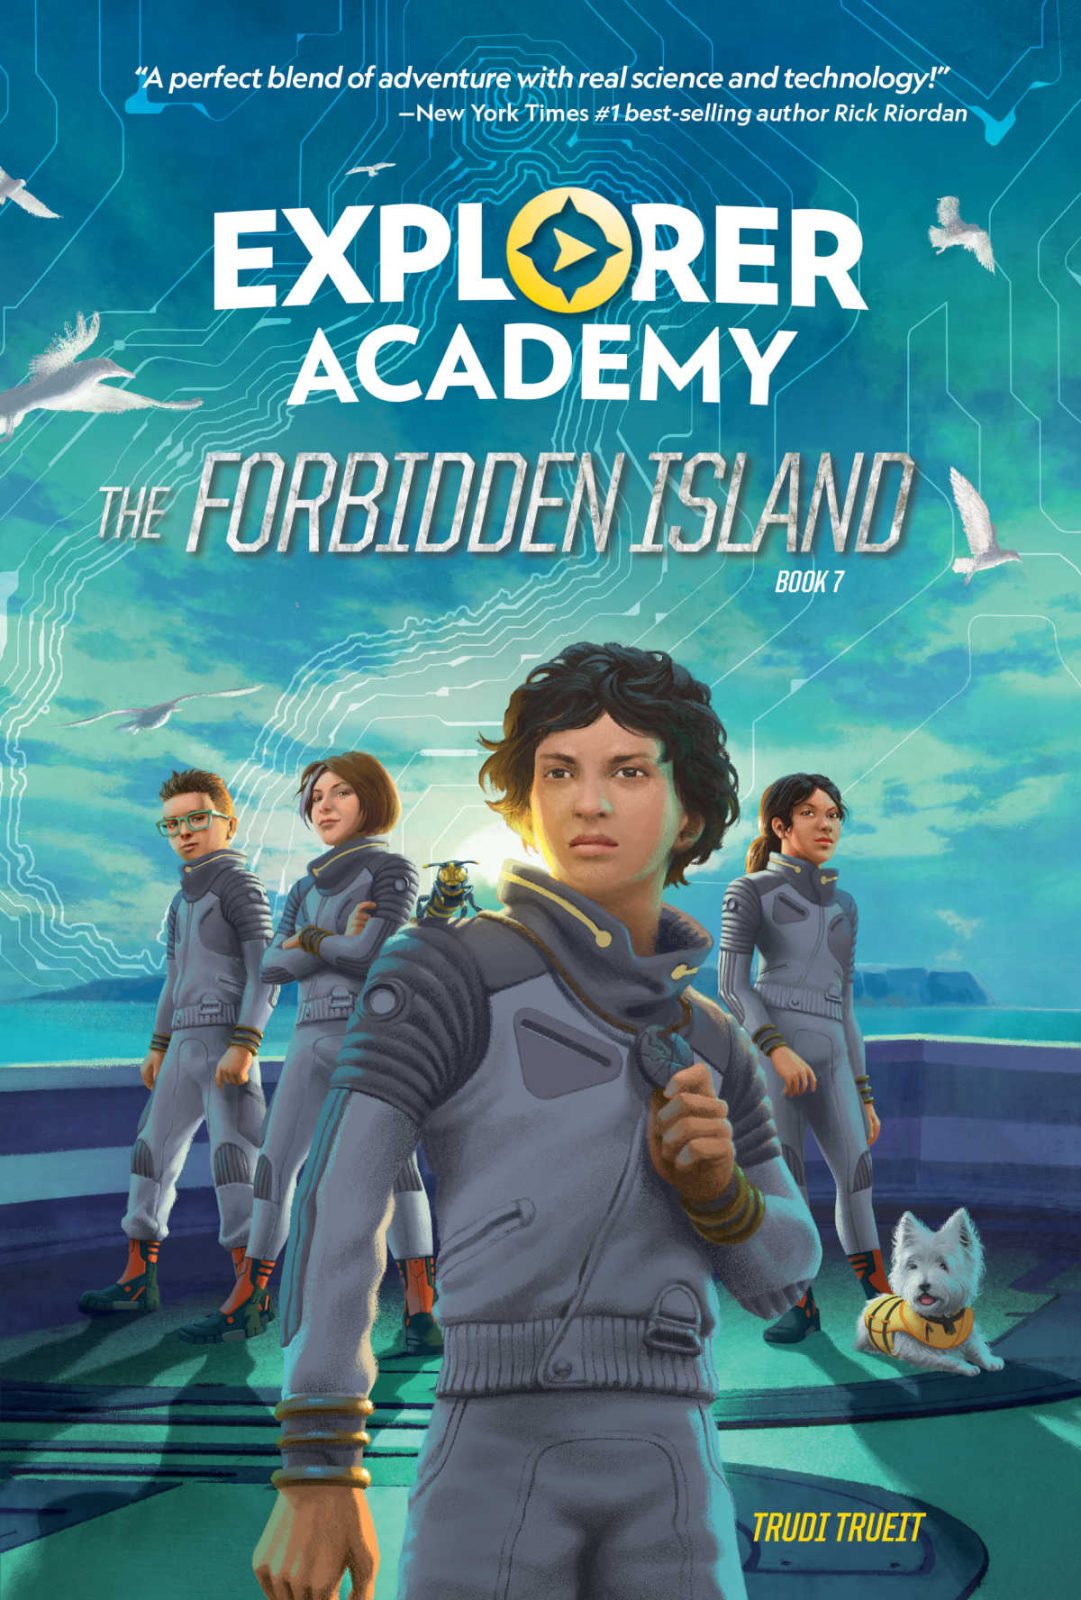 Welcome to the Explorer Academy: The Forbidden Island Blog Tour! Follow along all week as we celebrate the release of the book.